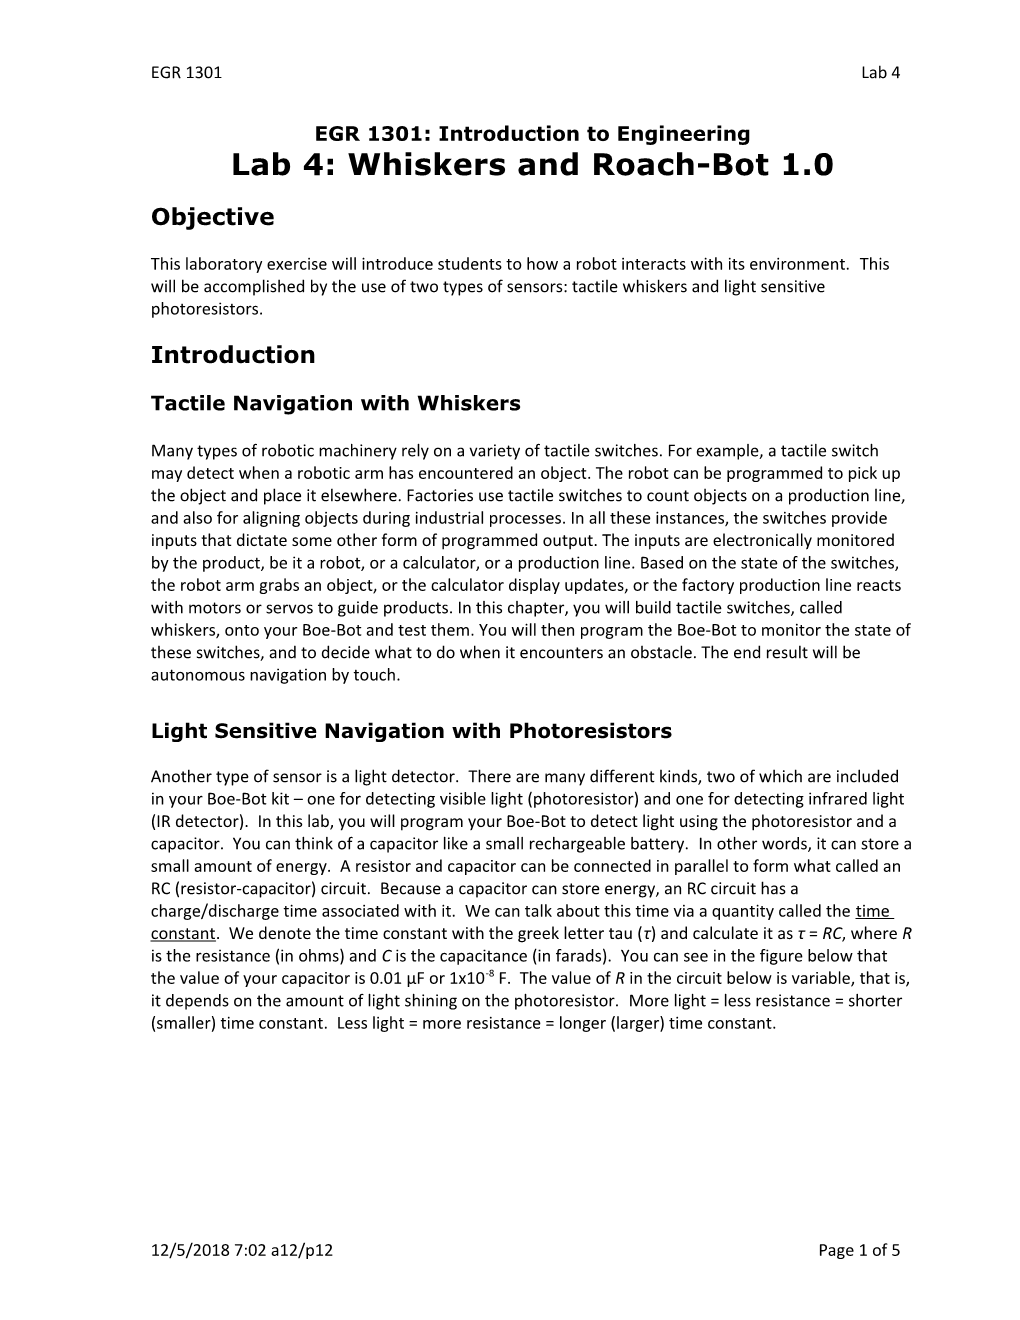 Lab 4: Whiskers and Roach-Bot 1.0